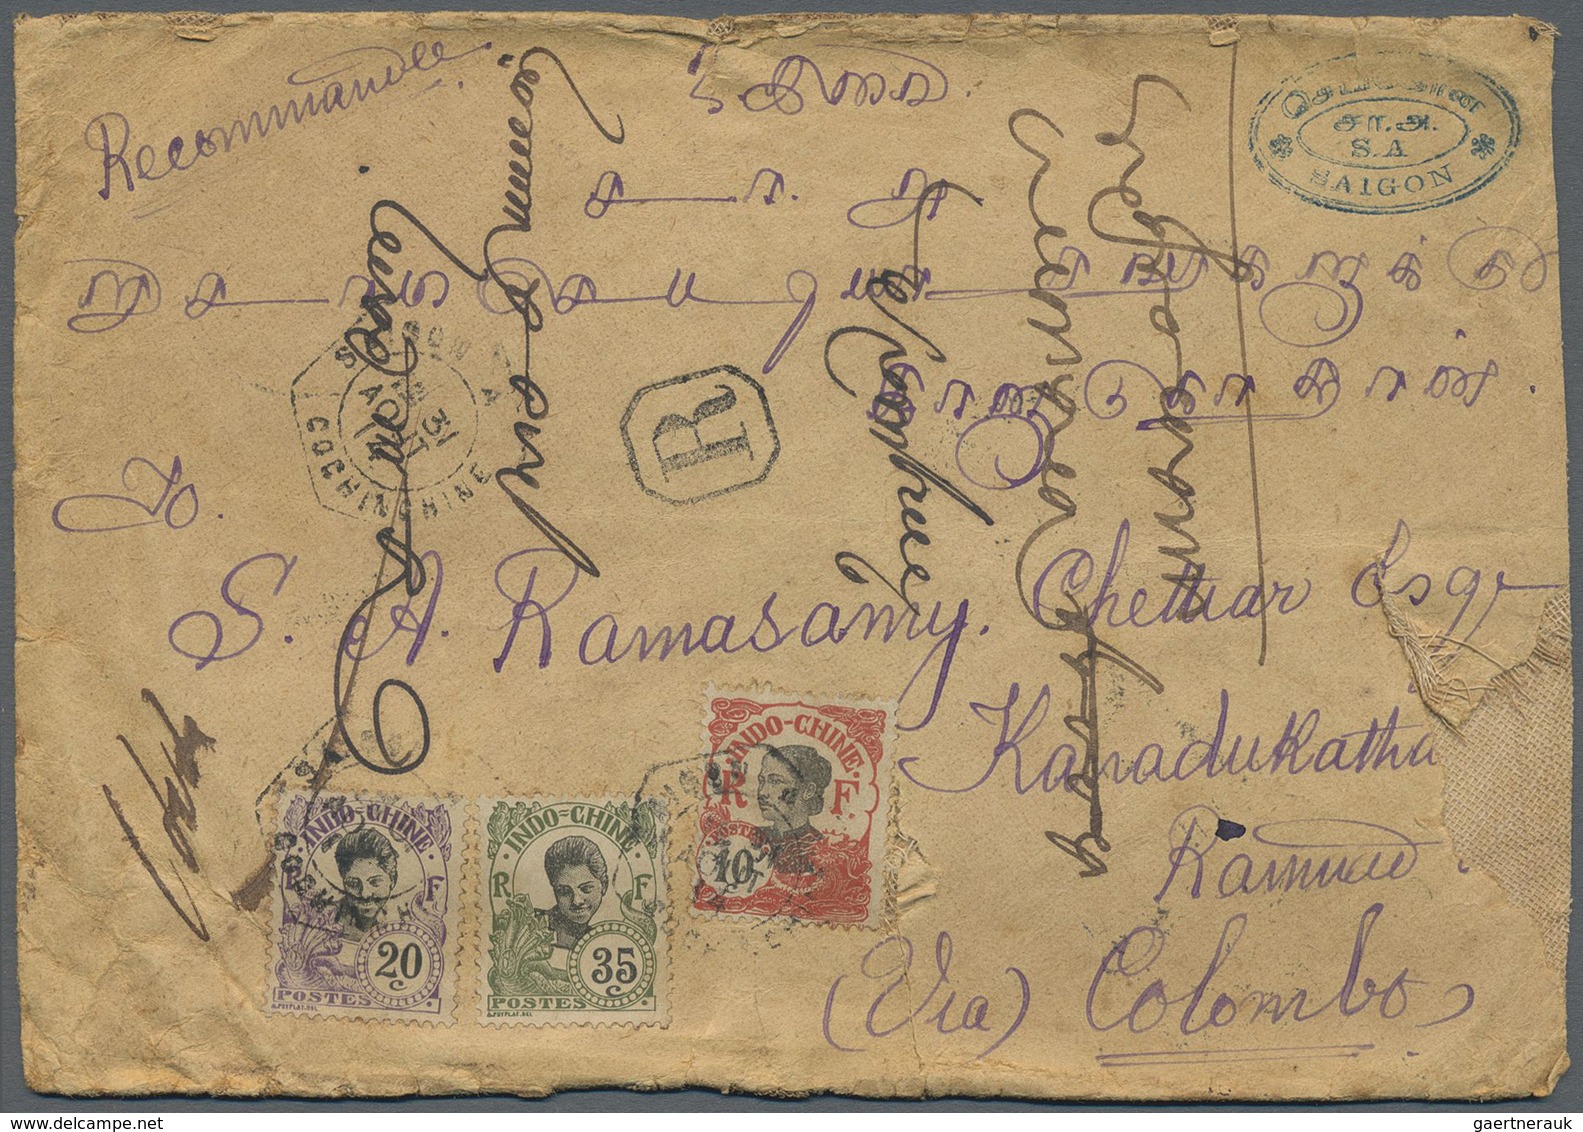 Br/ Französisch-Indochina: 1903/37, covers (ca. 90), a. o. red Haiphong of 1901, ship post marking "KOBE